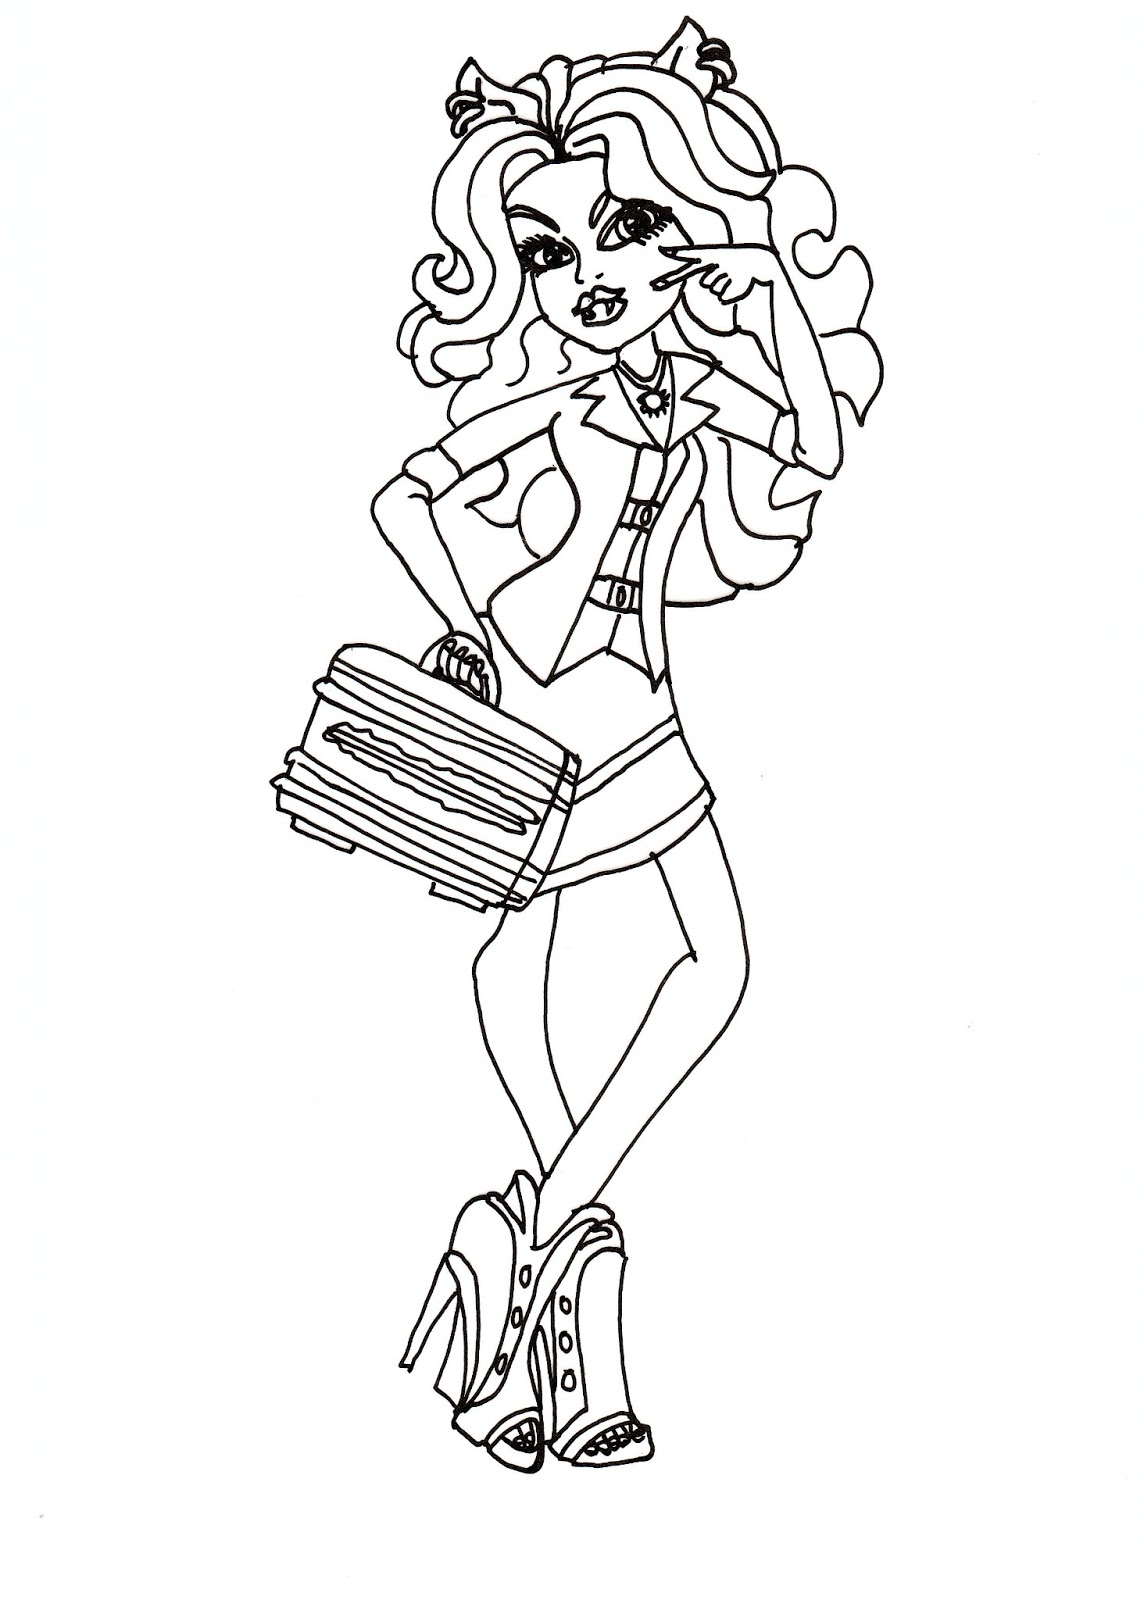 Clawdeen Entrepreneur Fashion Coloring Sheet CLICK HERE TO PRINT Free printable monster high